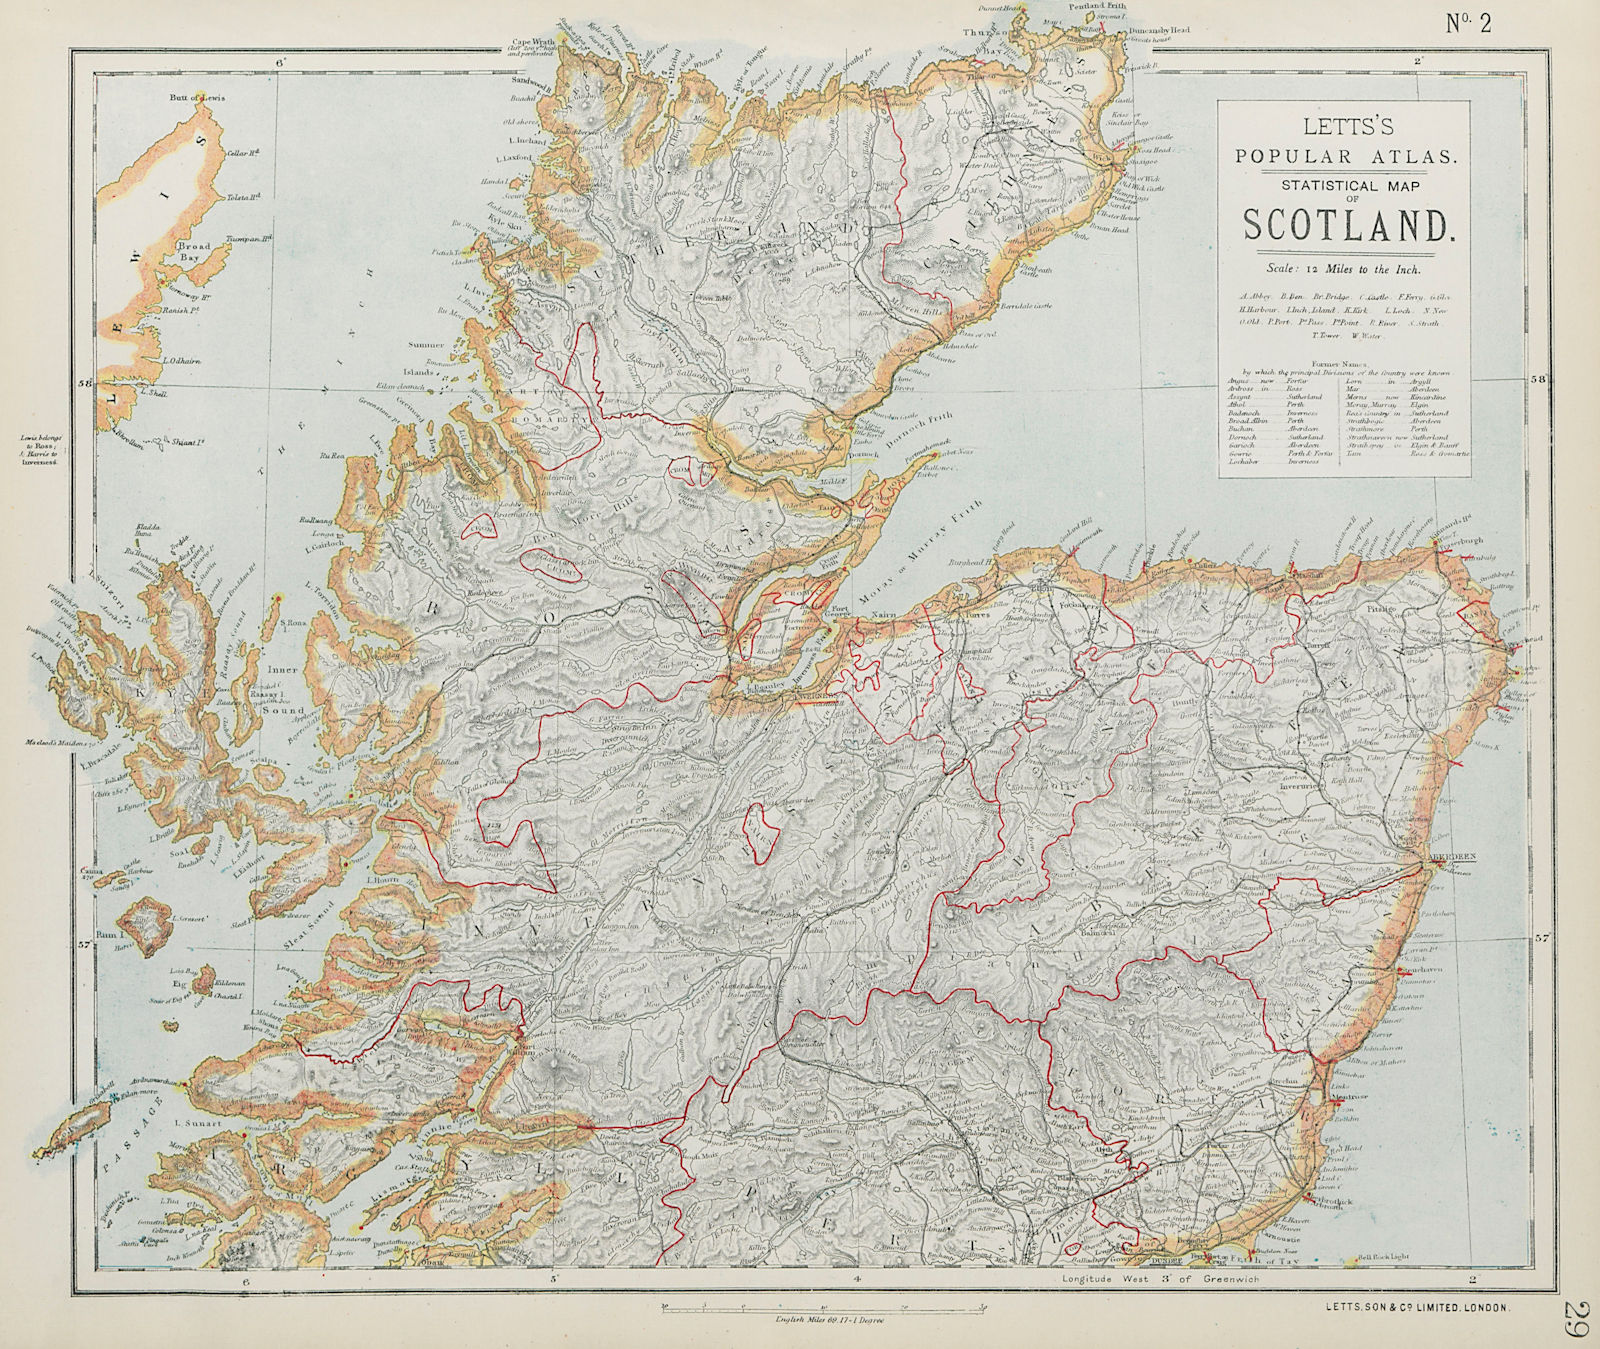 Associate Product SCOTLAND NORTH. Highlands & islands. Counties. LETTS 1884 old antique map